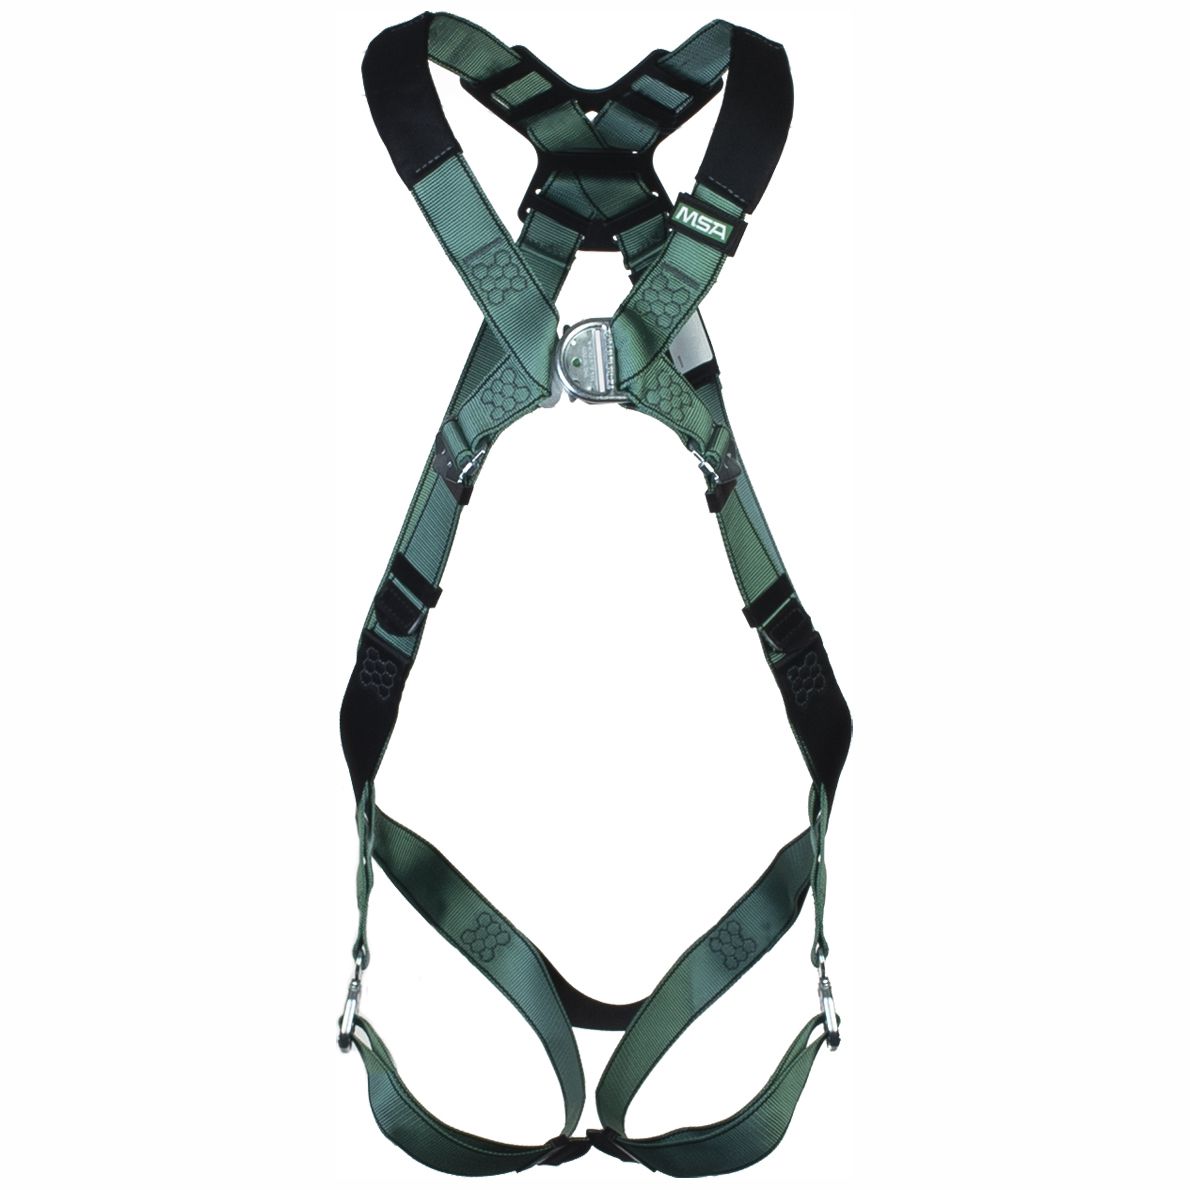 SALE: MSA V-Form Fall Protection - EN 358/361/1497 - Fall arrest harness - 2-point - XS